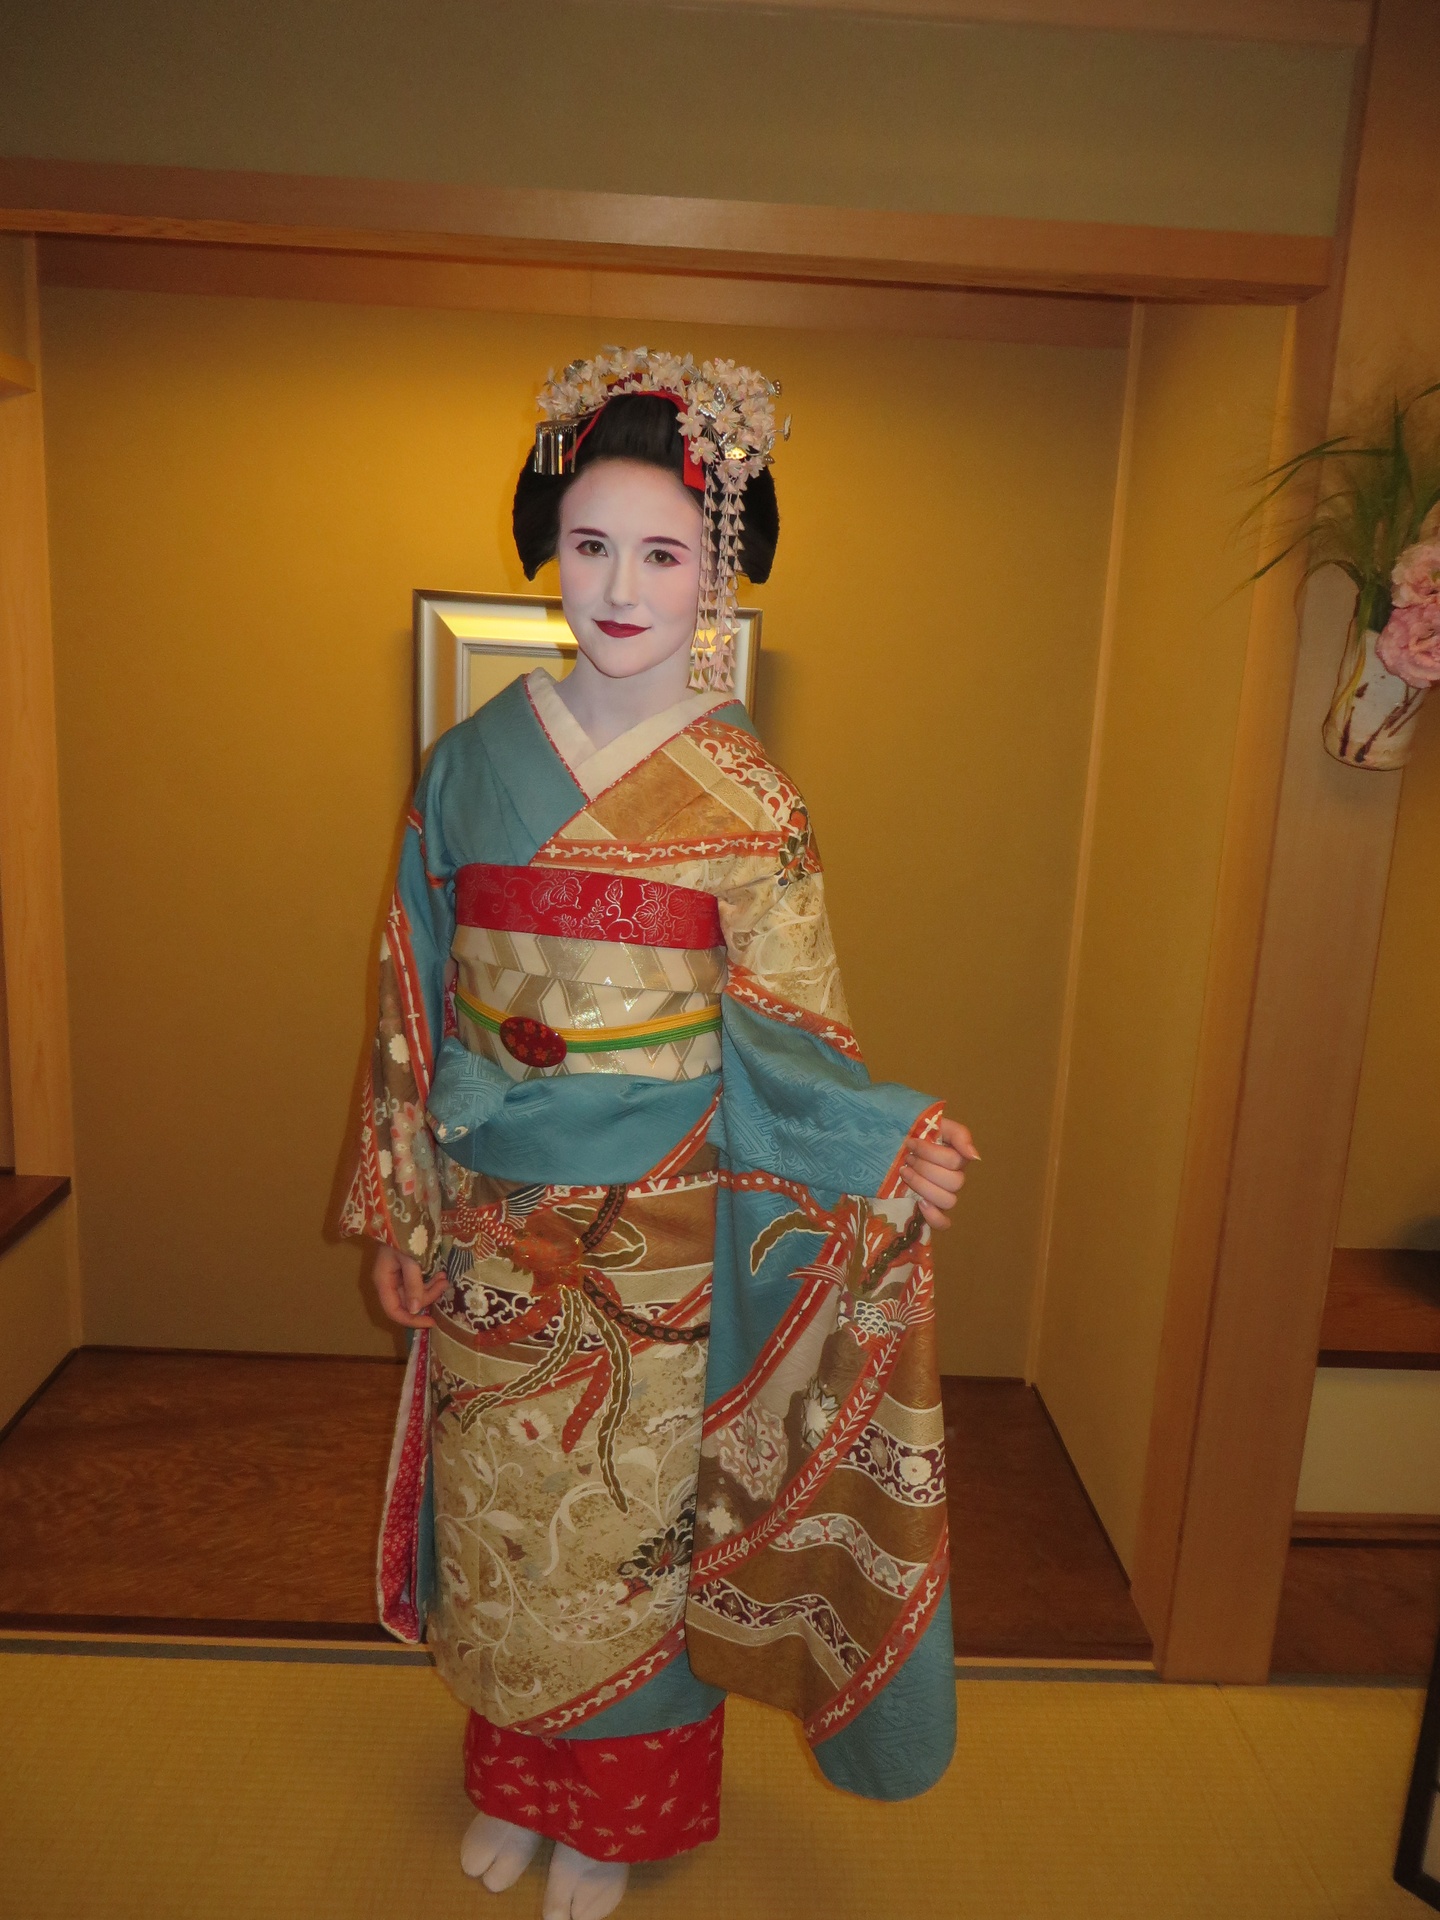 A woman dressed as a traditional geisha wearing make up and traditional headdress